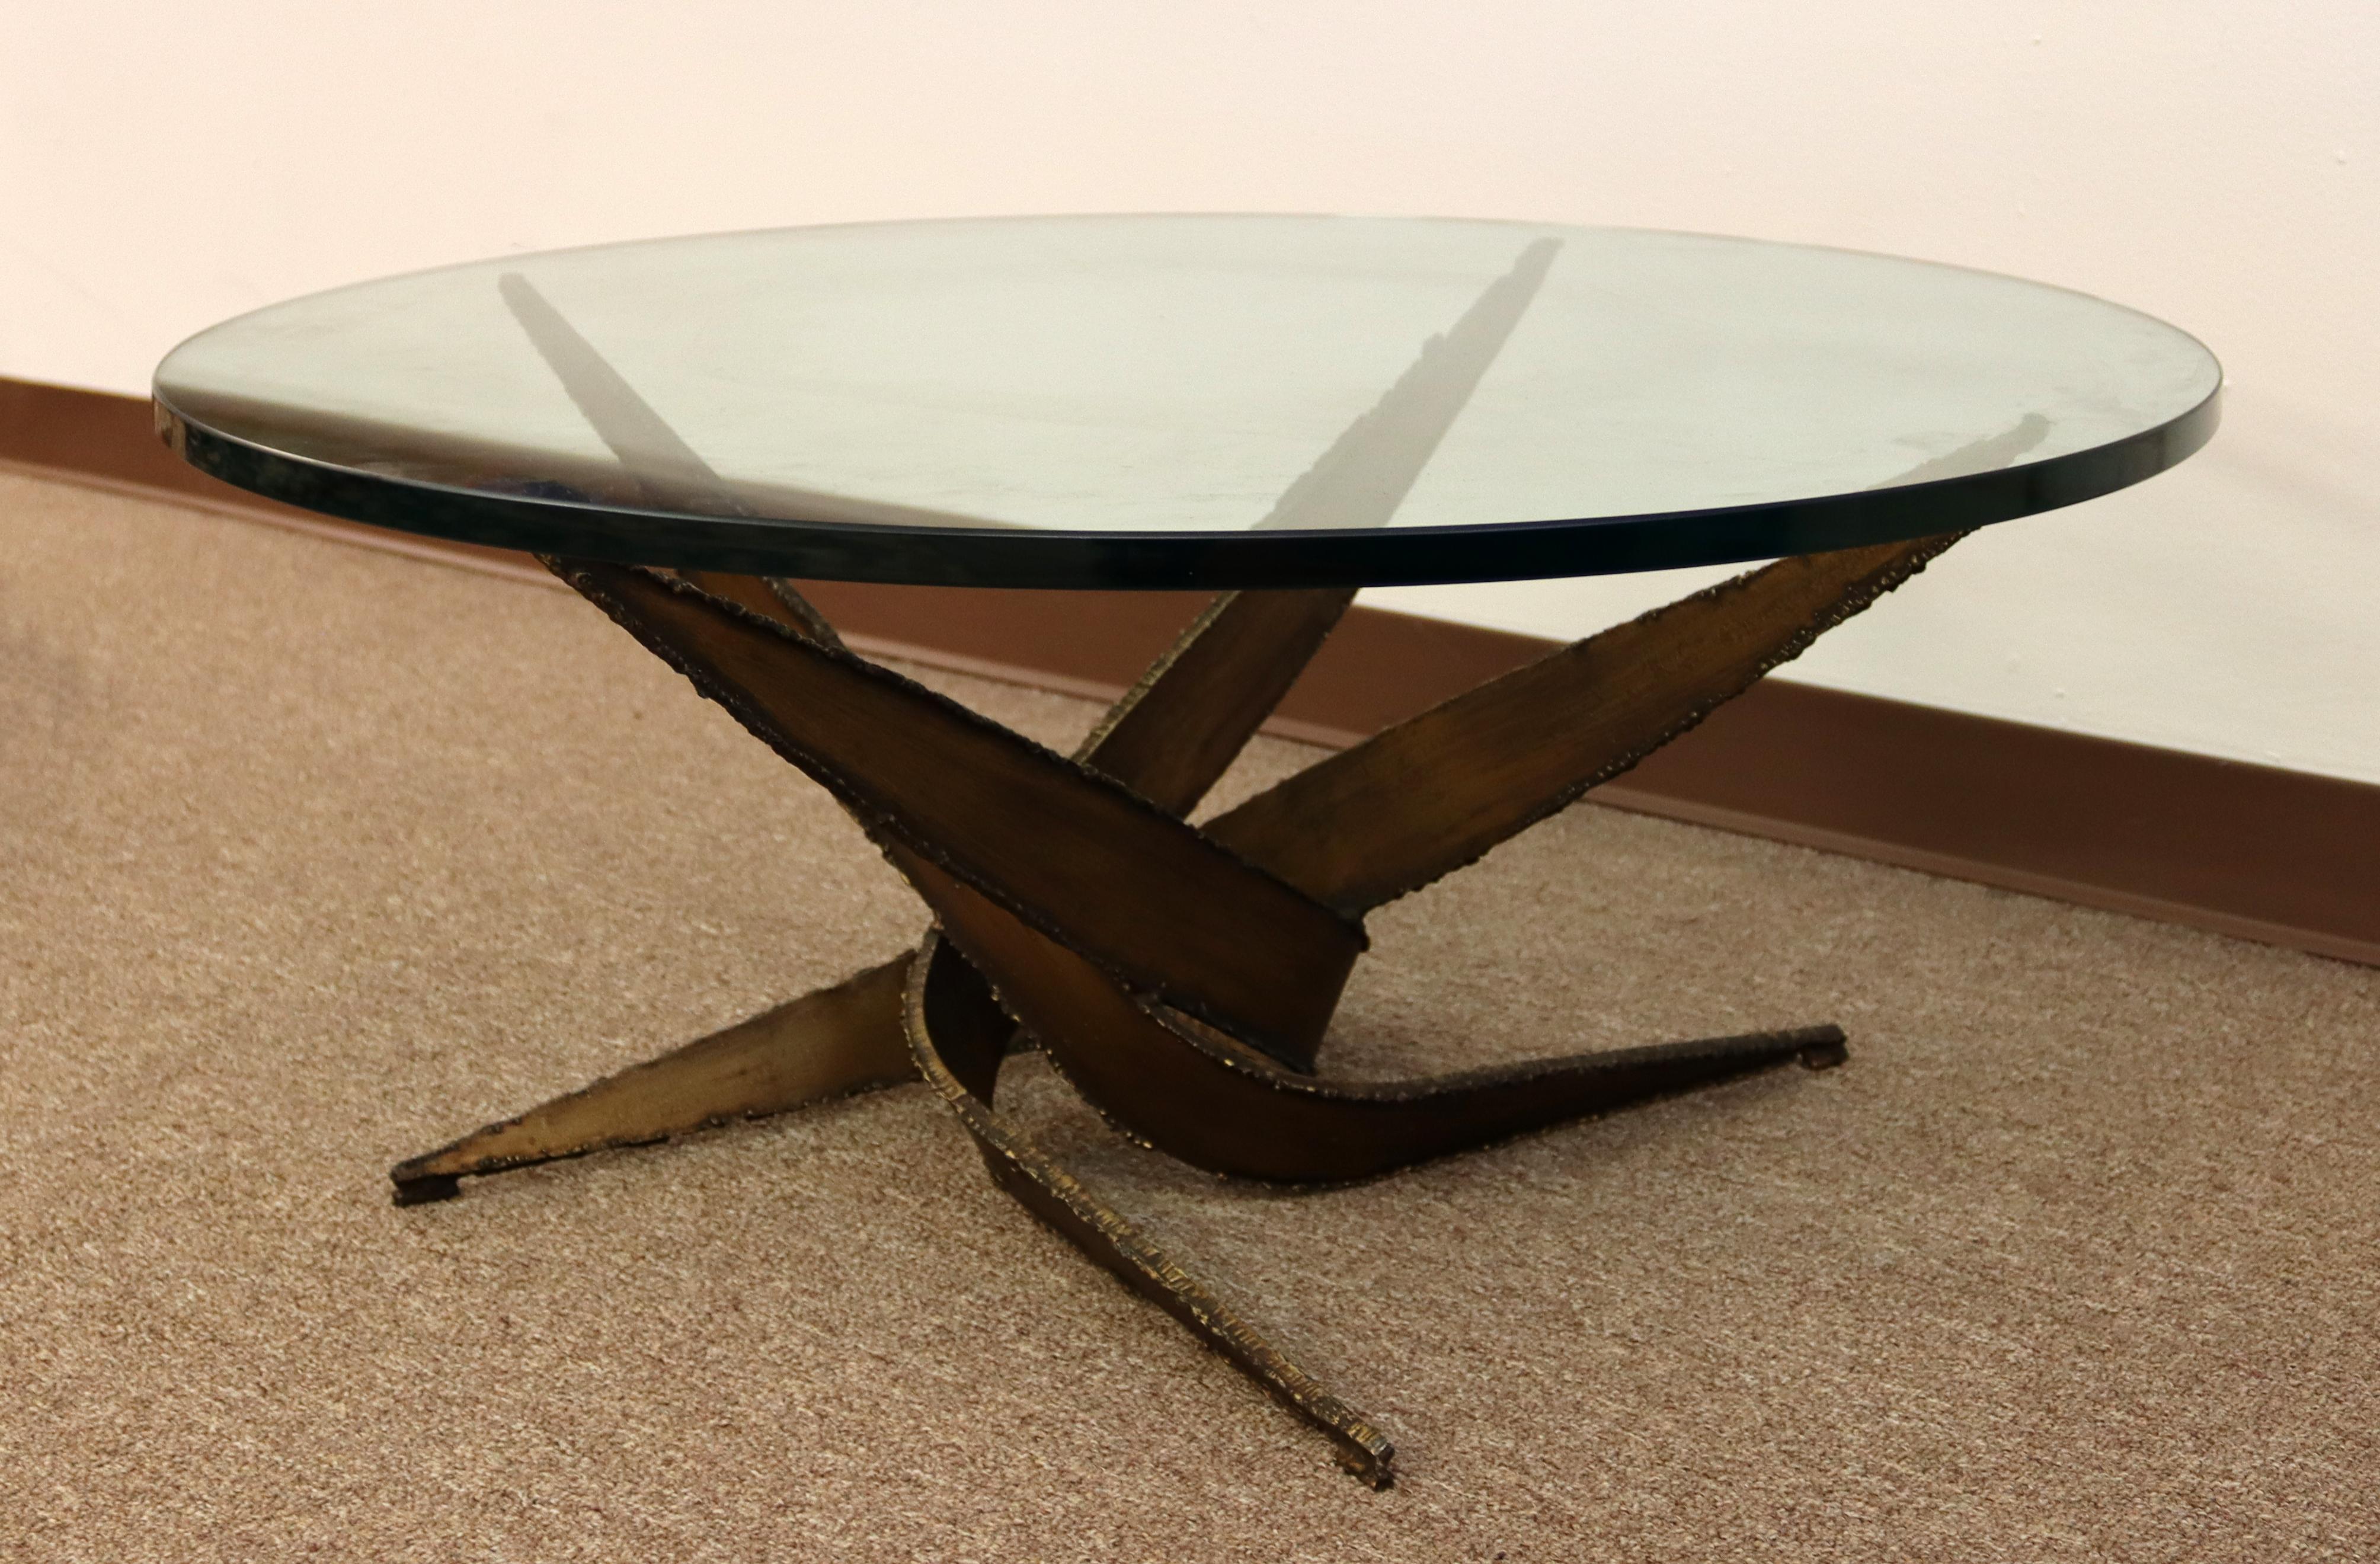 Late 20th Century Mid-Century Modern Silas Seandel Brutalist Bronze Cocktail Coffee Table 1970s